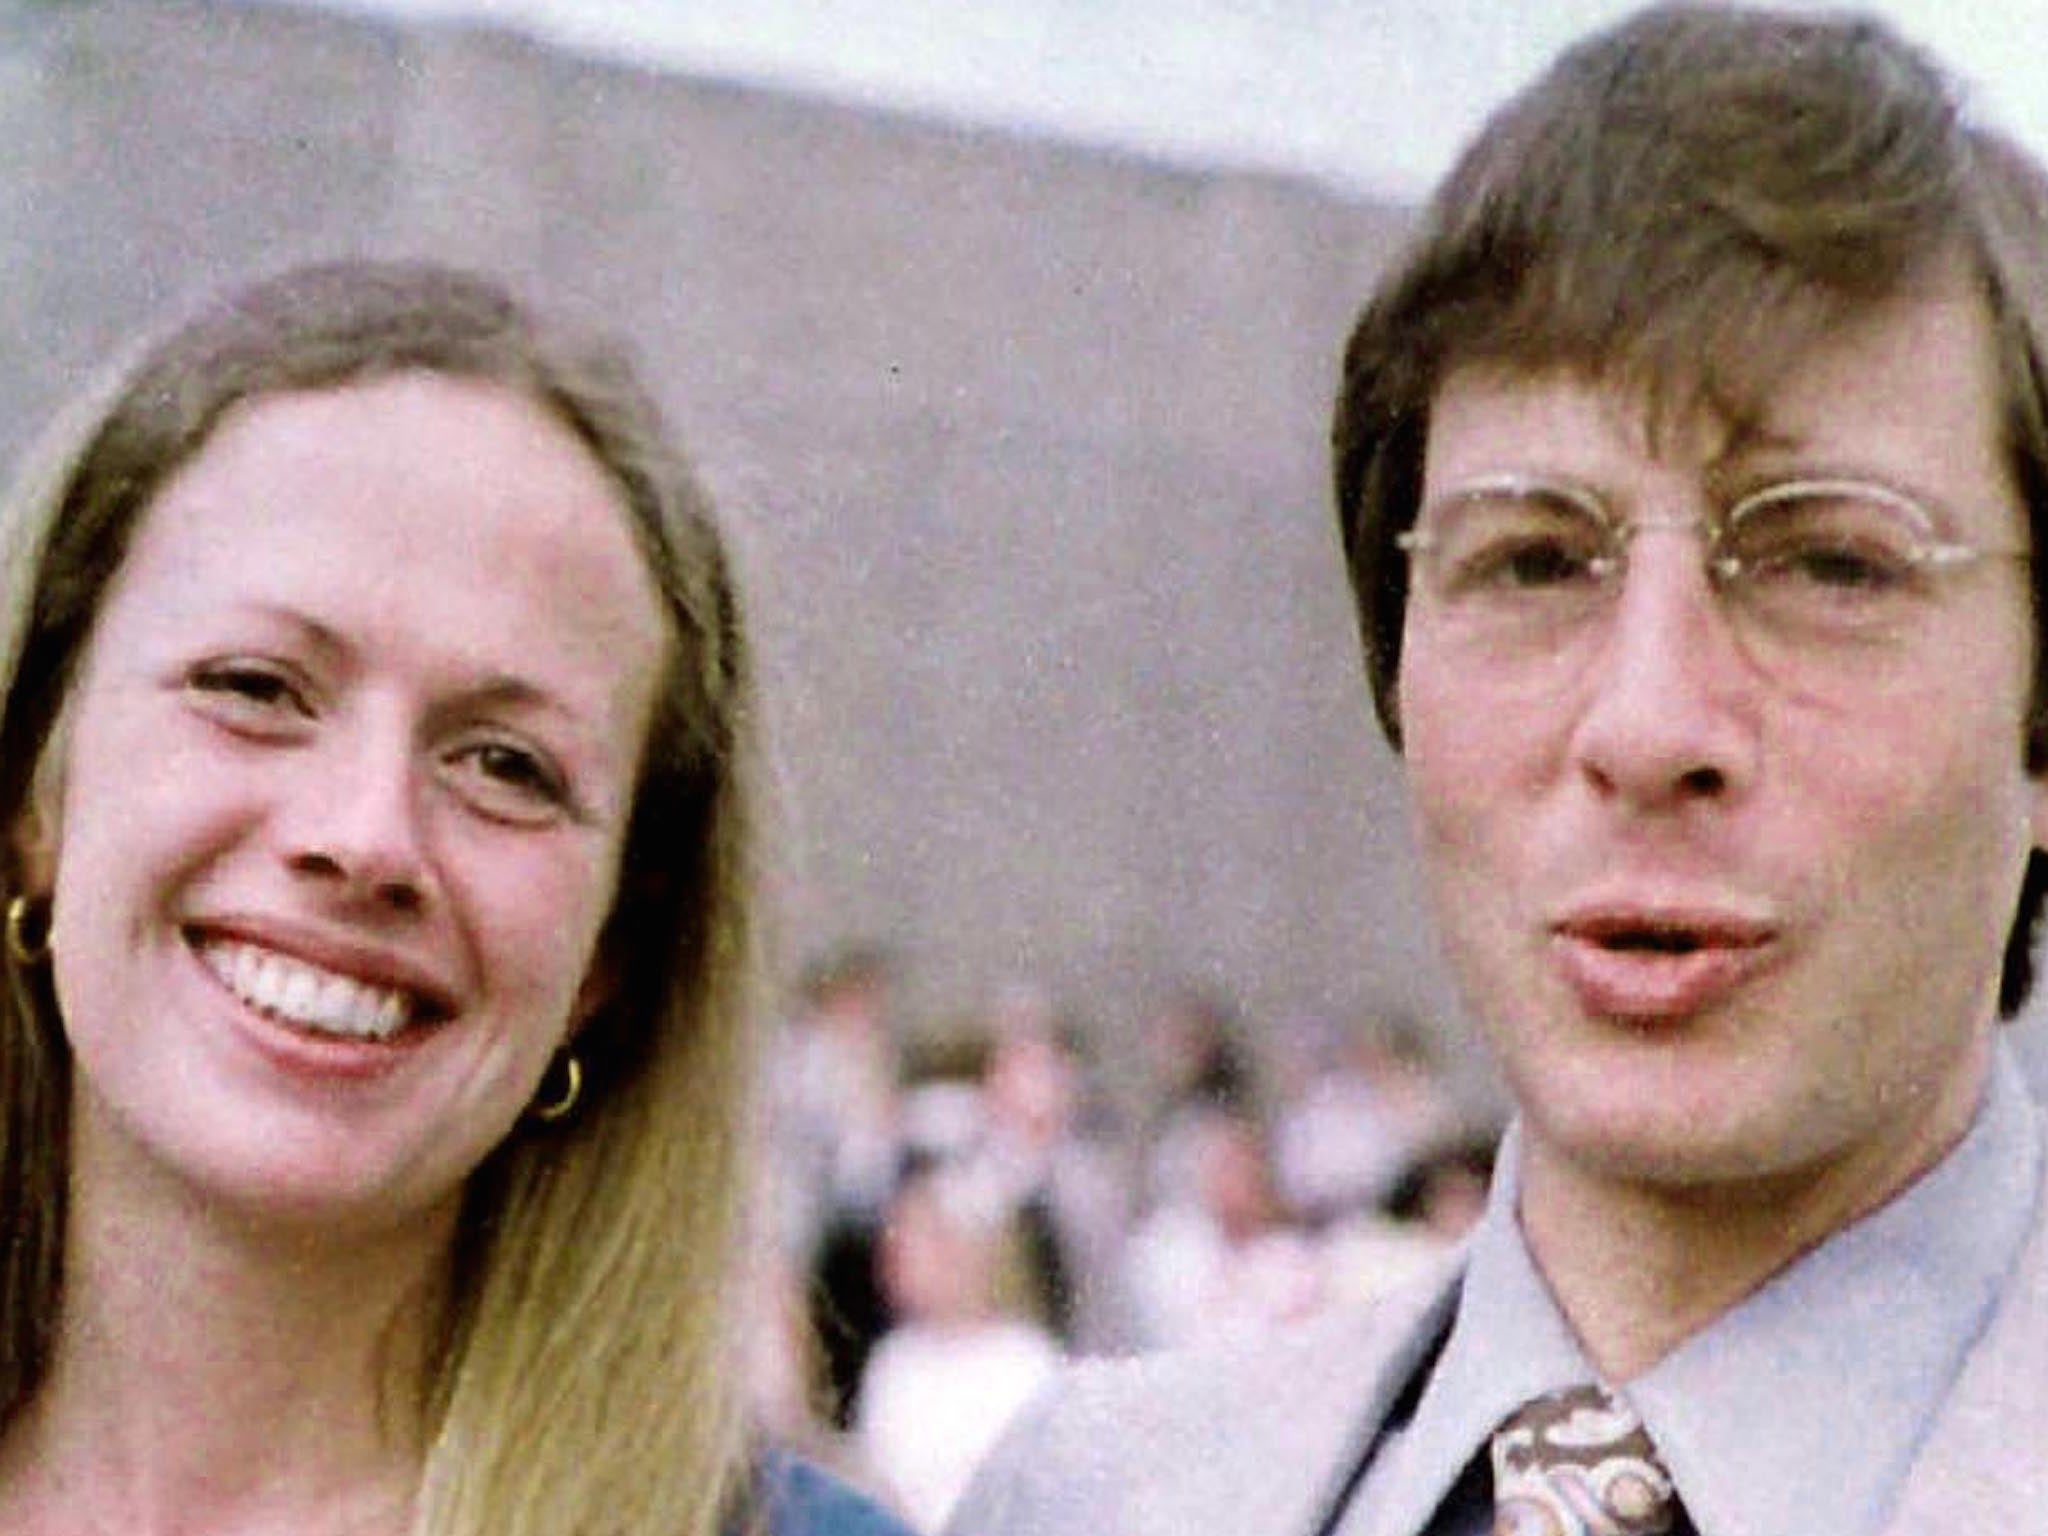 Robert Durst was questioned, but never charged, over the disappearance of his first wife, Kathleen